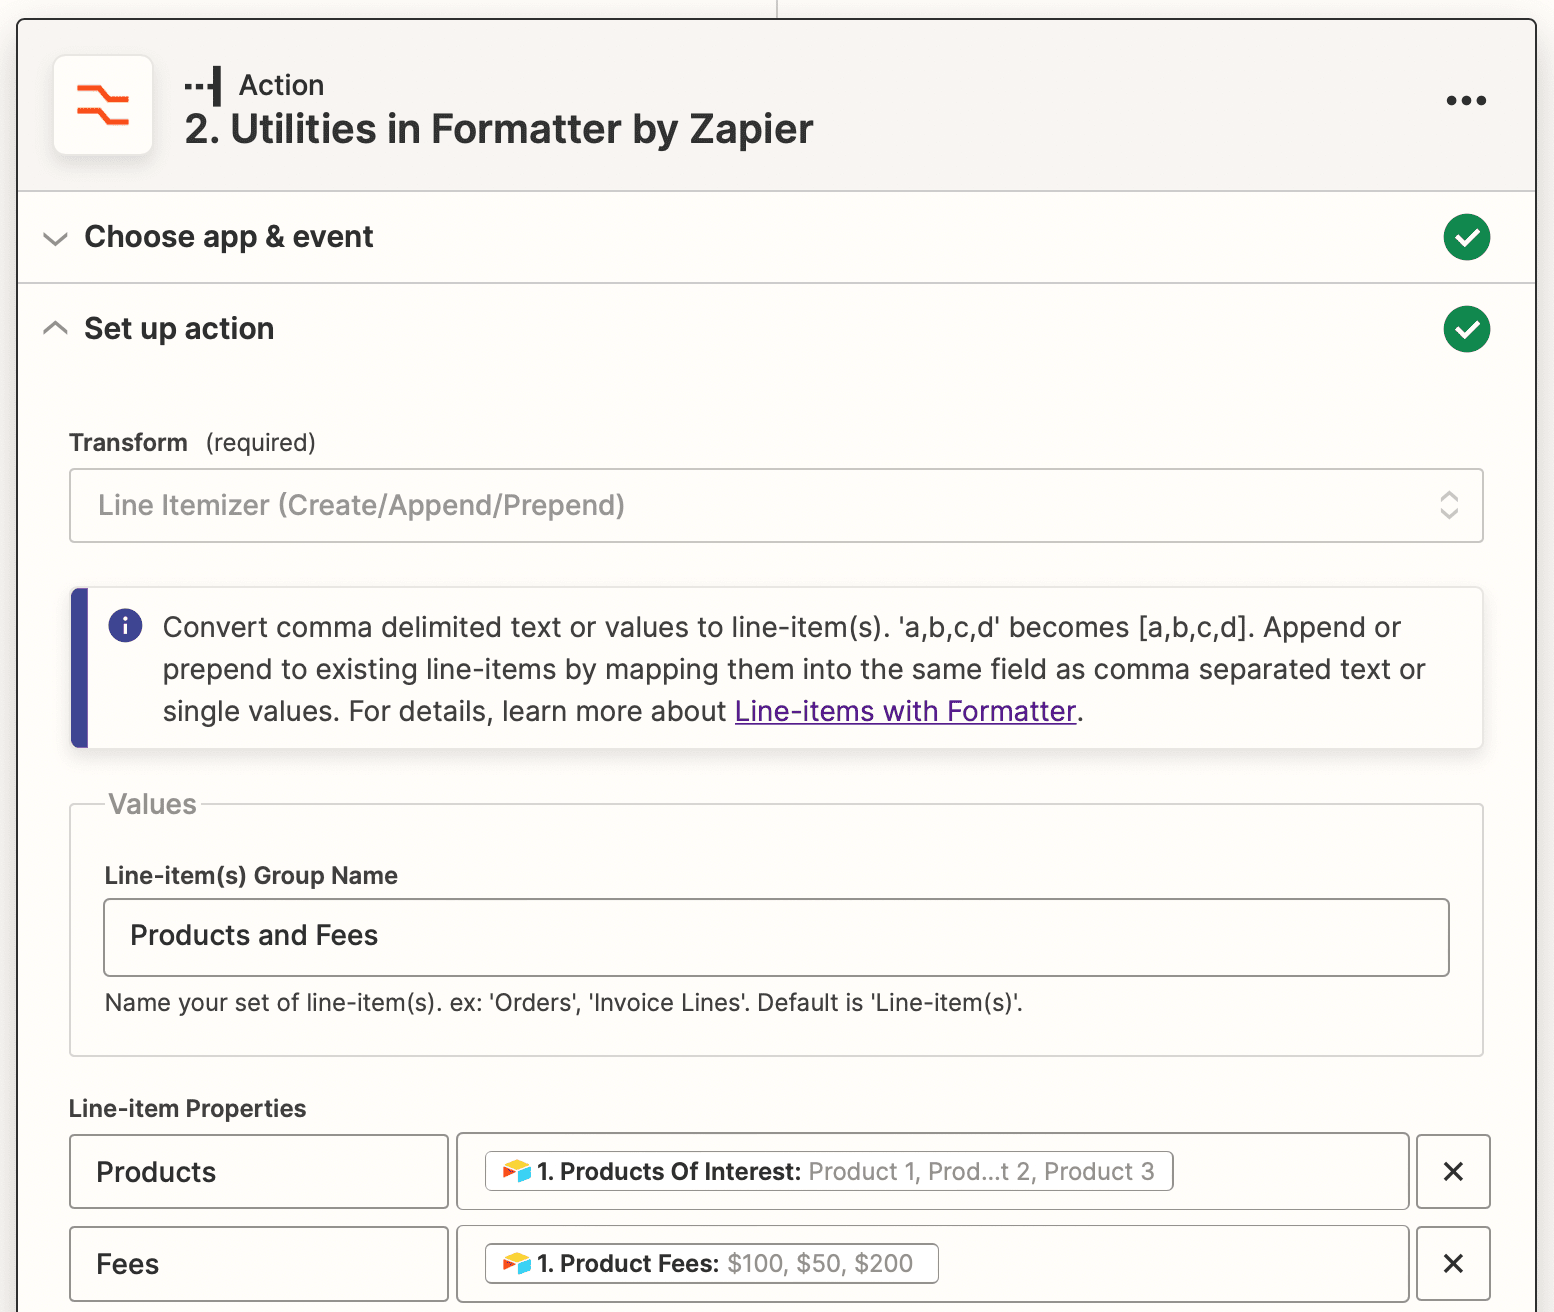 Screenshot of Zapier utilities in formatter action with line itemizer transform and action setup